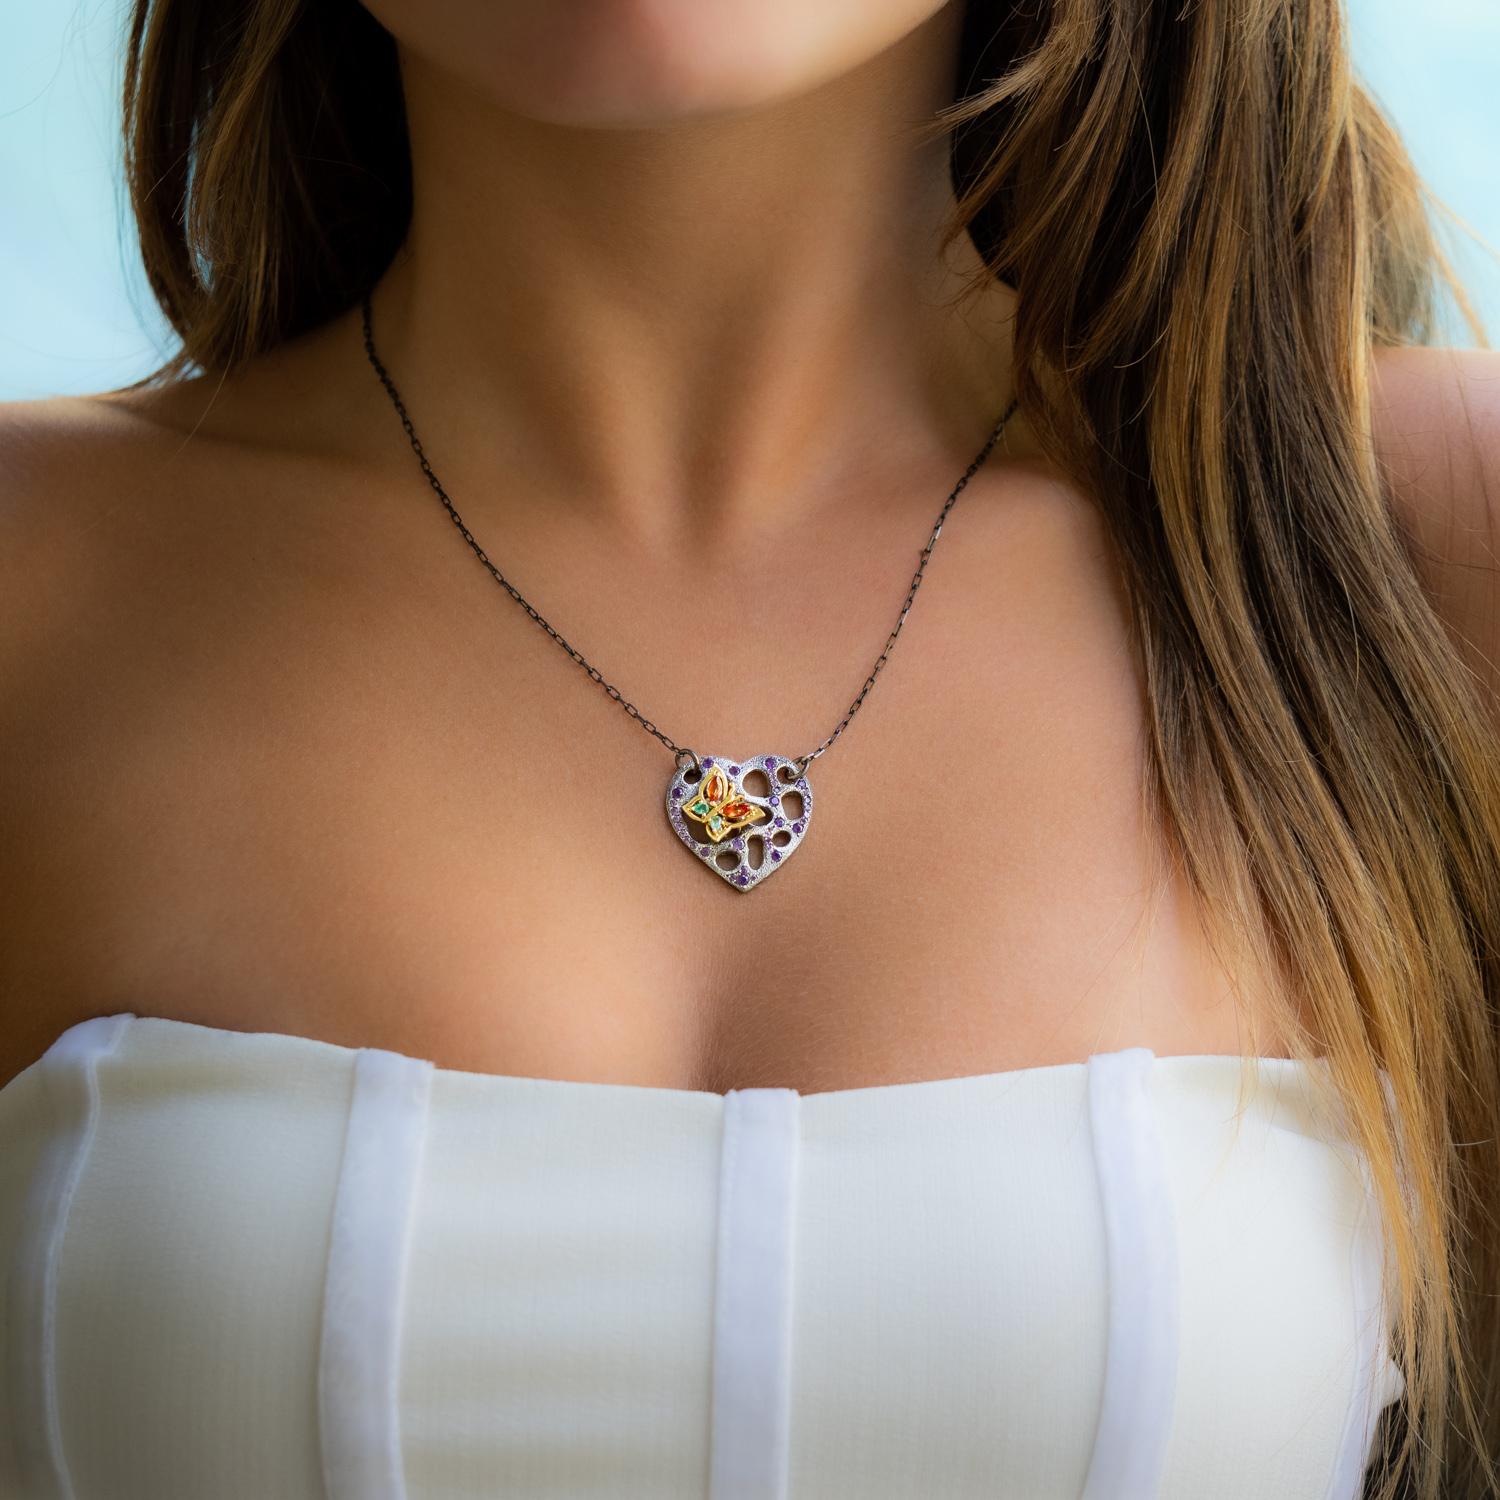 This enchanting heart and butterfly necklace is crafted from 18K rose gold and sterling silver, adorned with emeralds, sapphires and amethyst. The butterfly, perching upon the heart with an amethyst face, bring color and awaken a sense of lightness